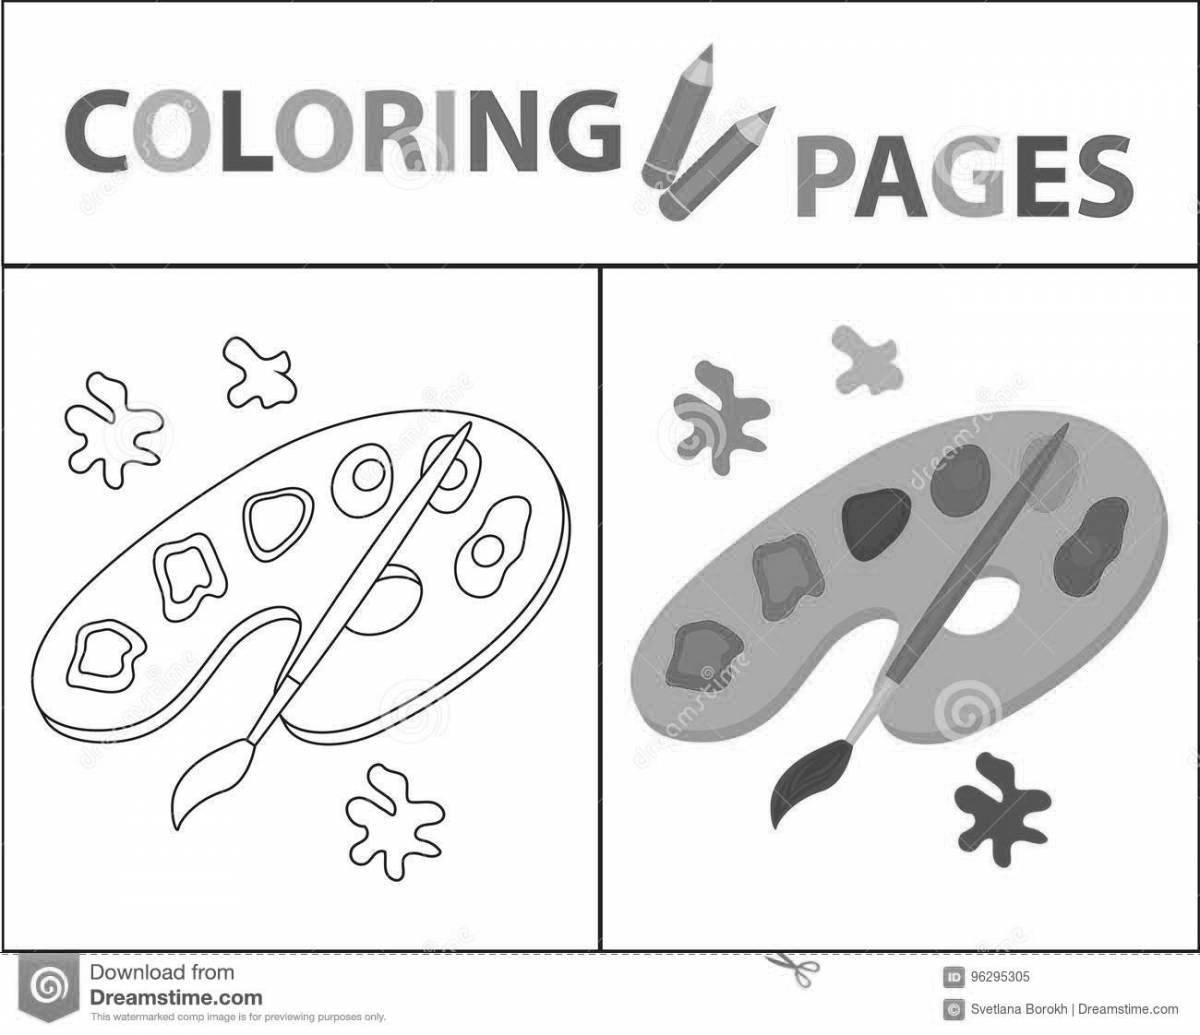 Colorful fun coloring palette for kids